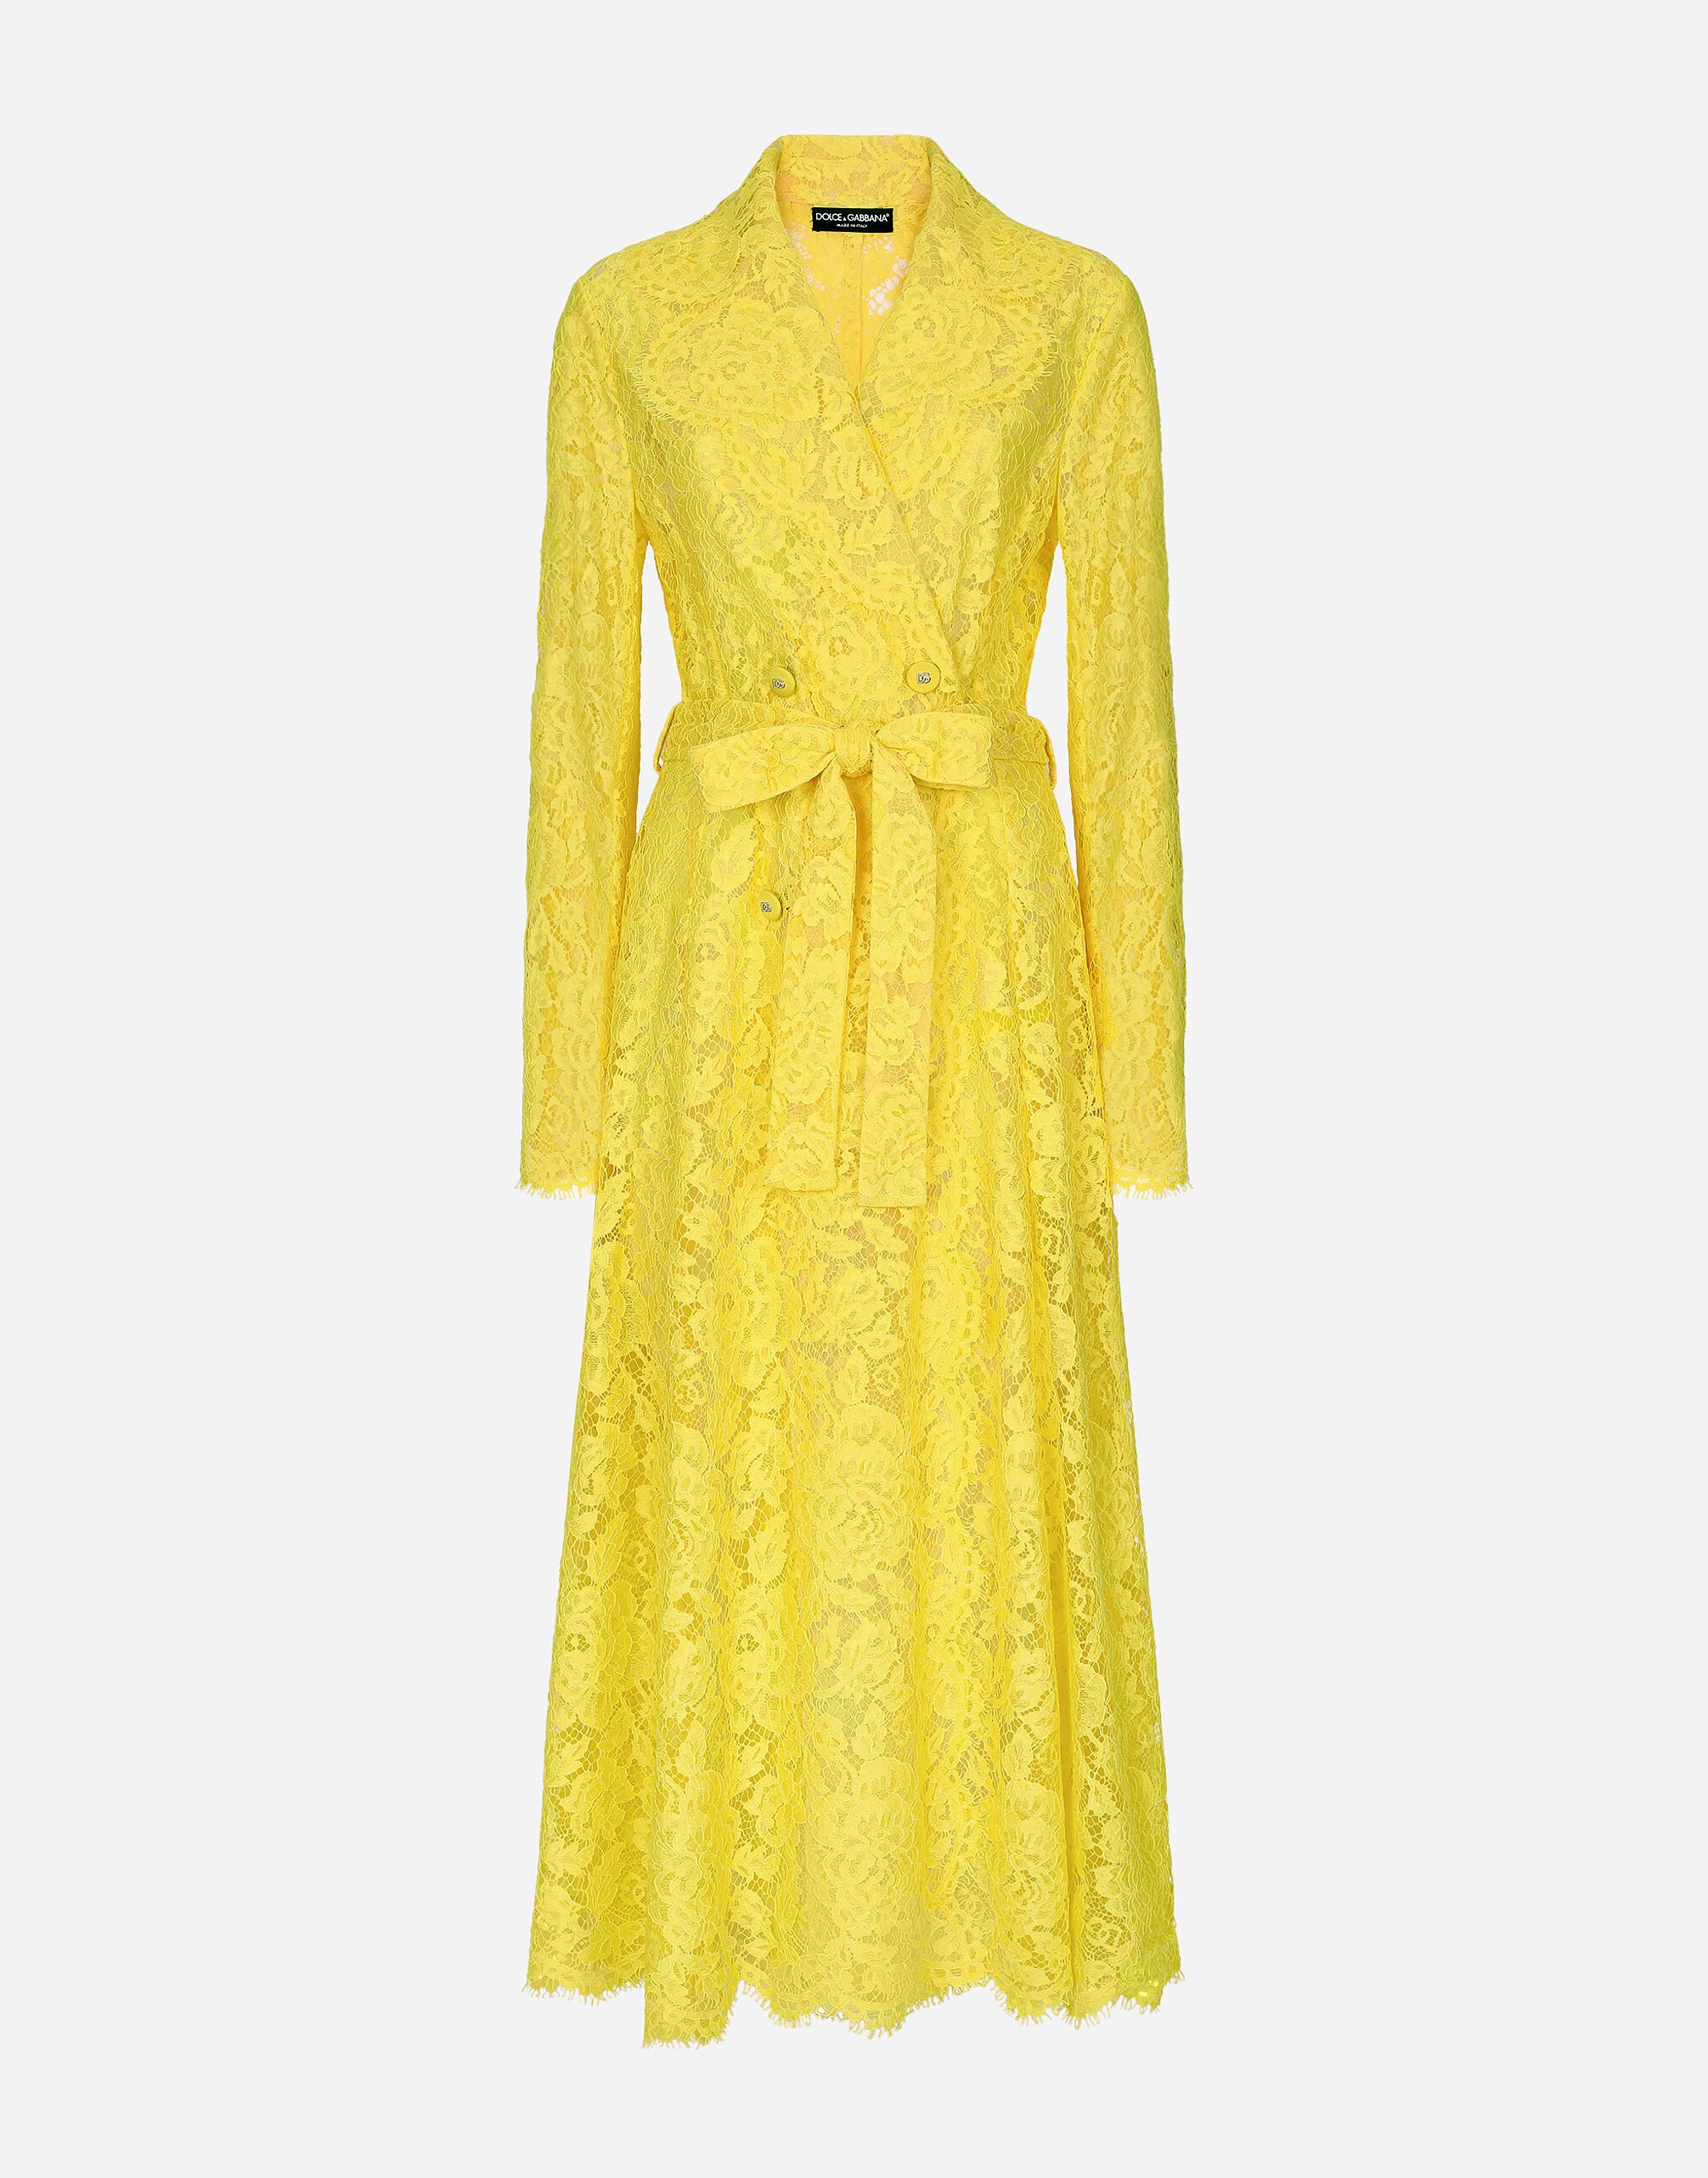 Dolce & Gabbana Branded floral cordonetto lace trench coat Yellow F29UCTHJMOK